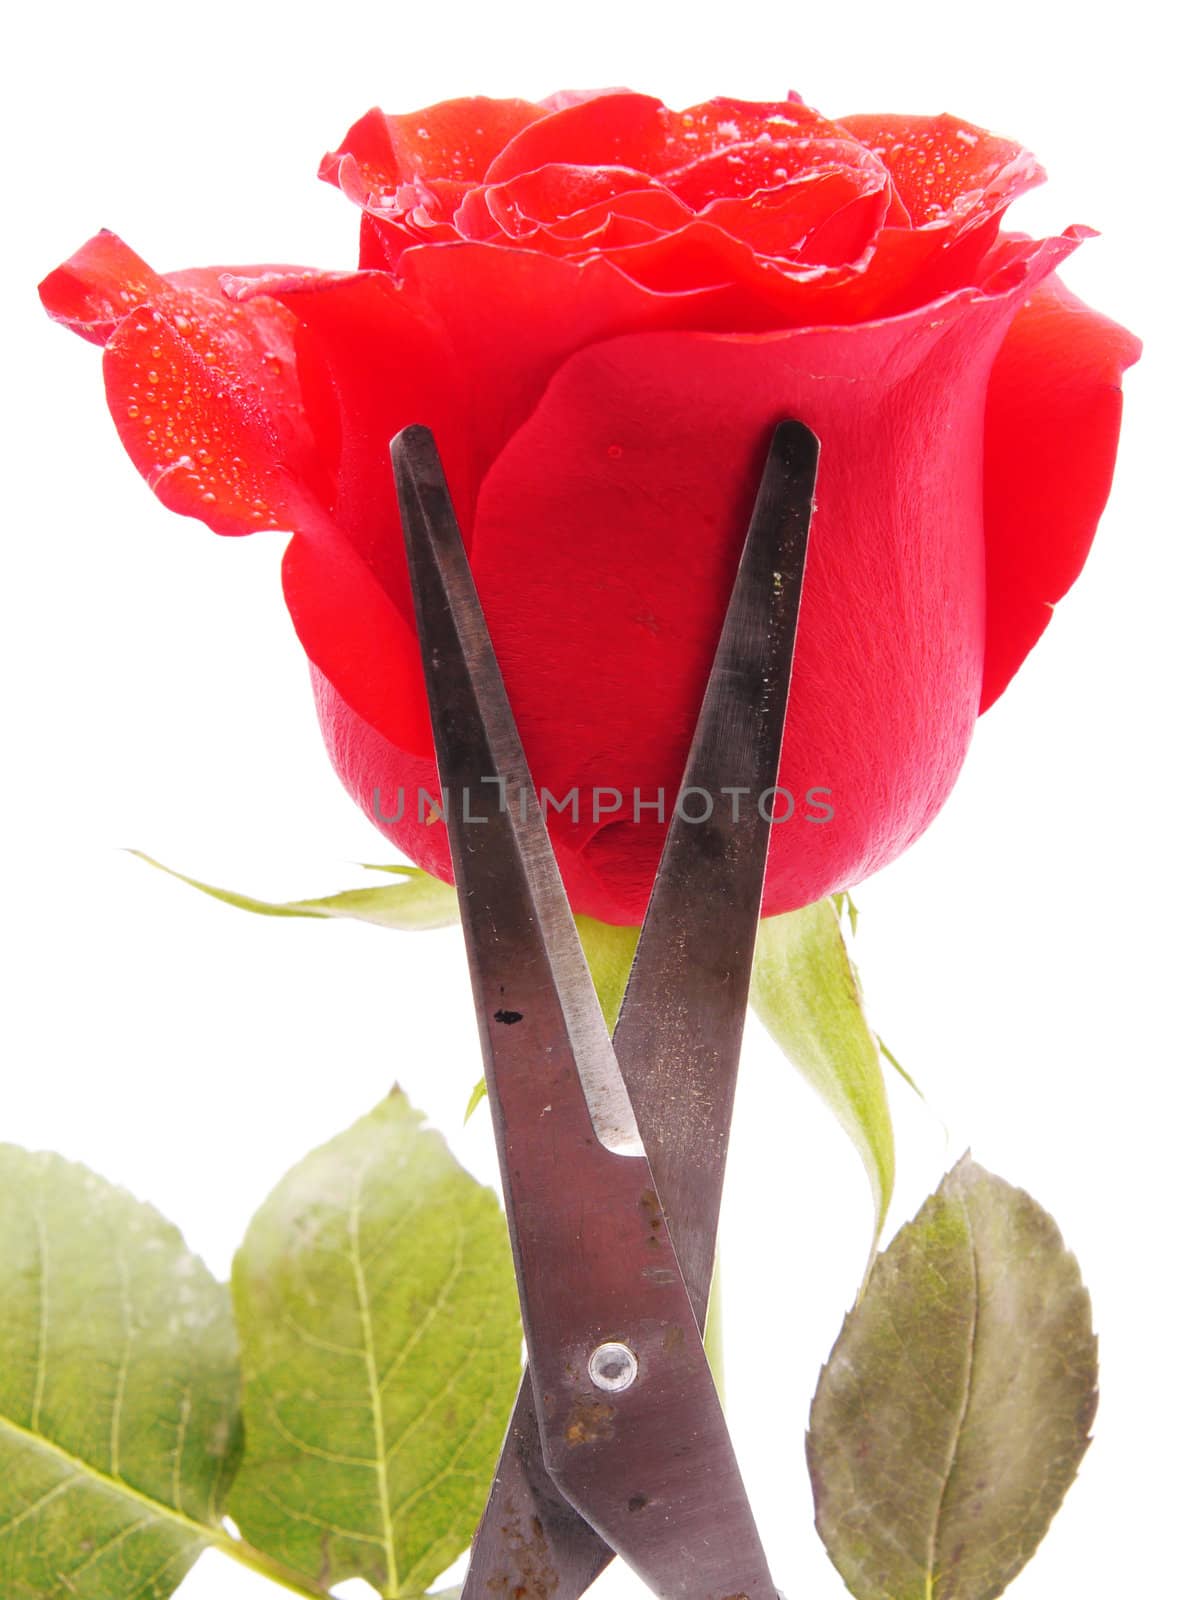 Rose and scissors on a white background by Enskanto